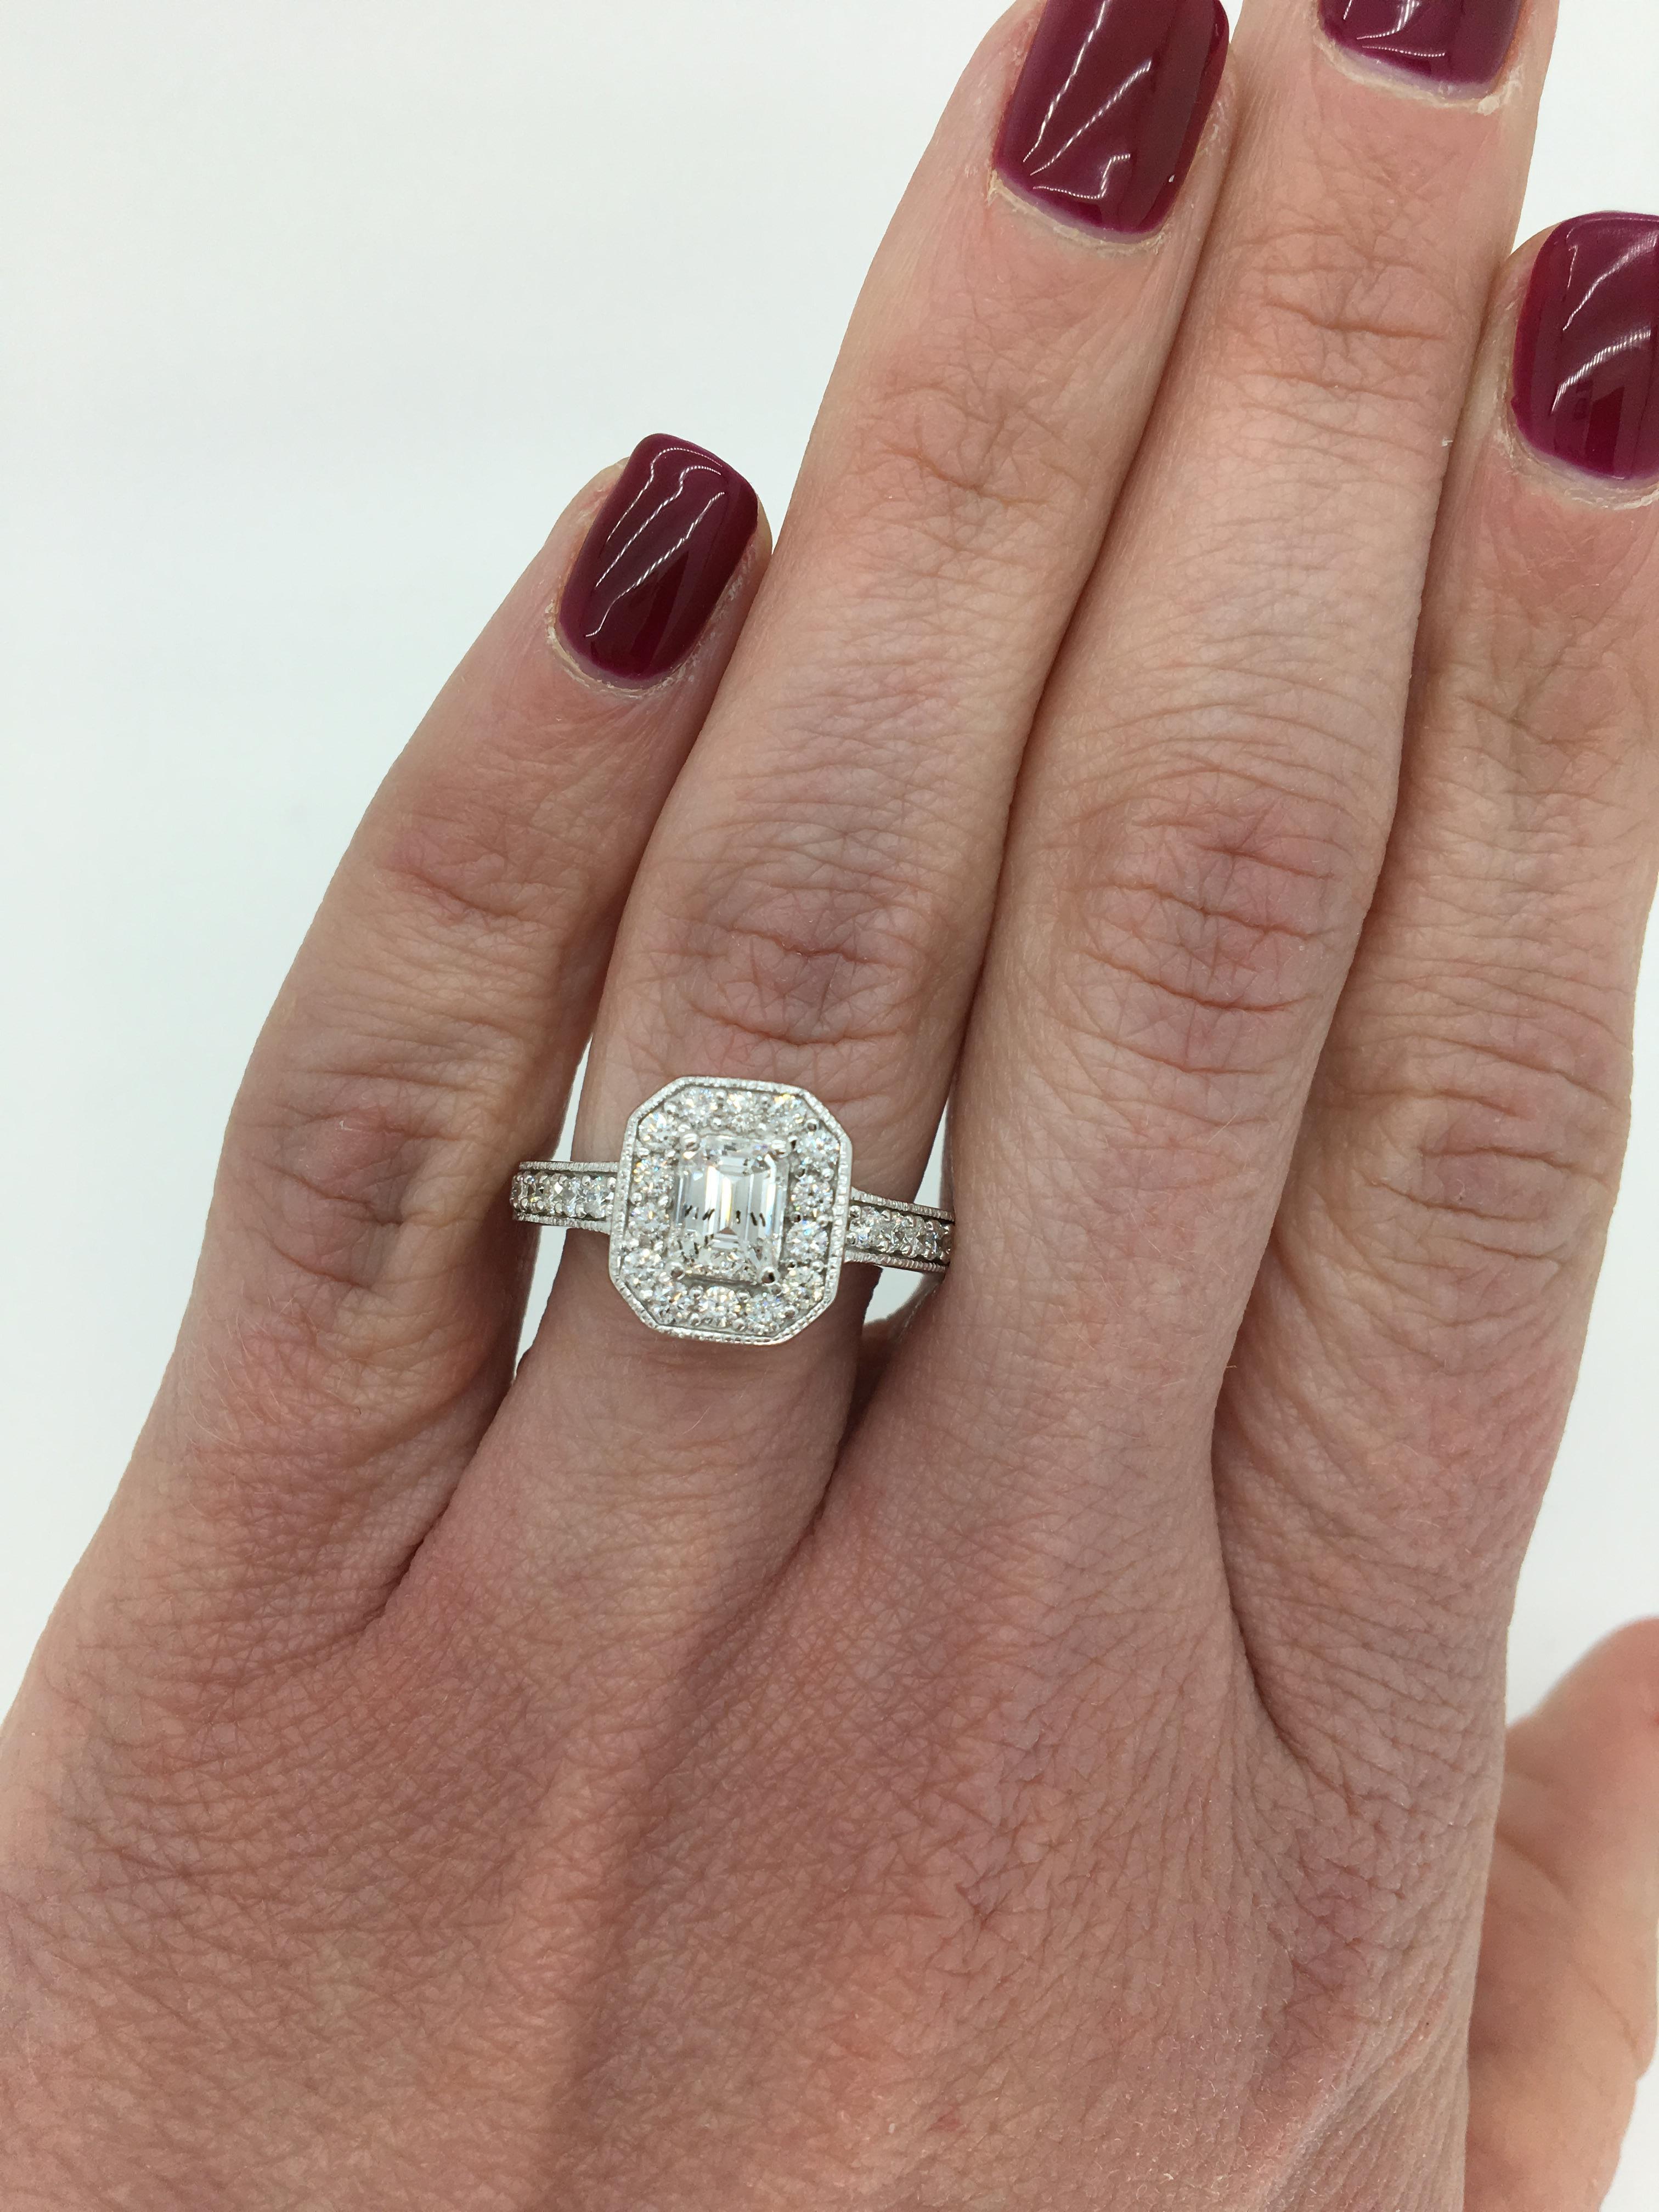 Emerald cut halo style diamond ring with filigree detail crafted in 14K white gold with yellow gold accents.

Center Diamond Carat Weight: Approximately .59CT
Center Diamond Cut: Emerald
Center Diamond Color:  F-G
Center Diamond Clarity: I1
Total